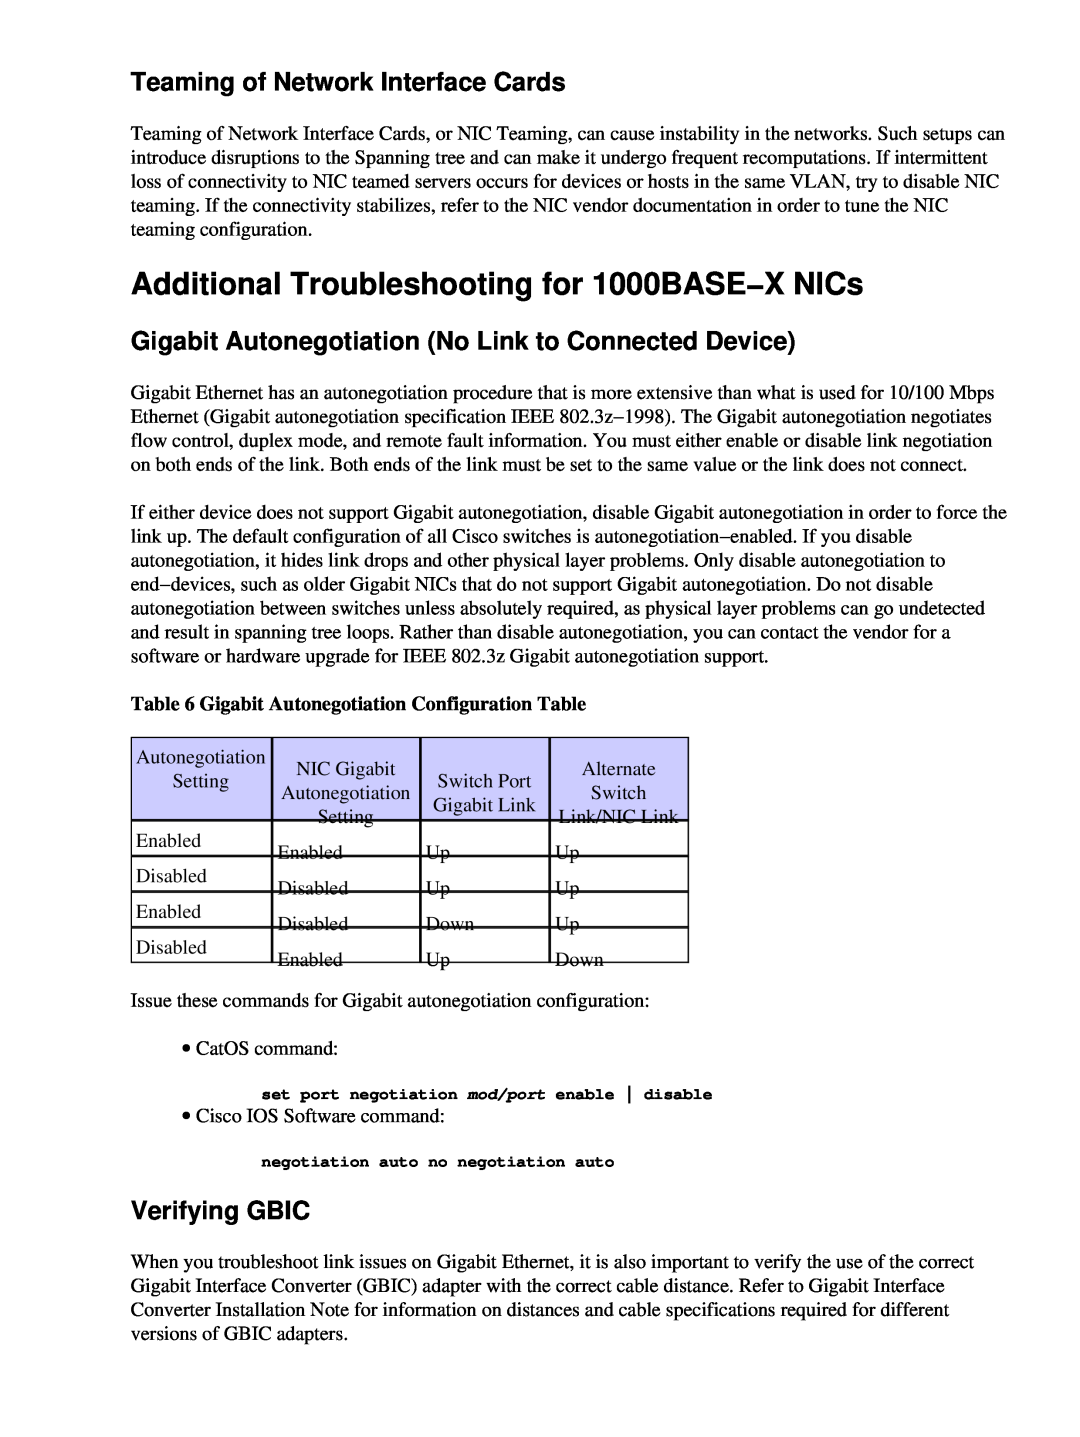 Cisco Systems 17053 Additional Troubleshooting for 1000BASE−X NICs, Teaming of Network Interface Cards, Verifying GBIC 